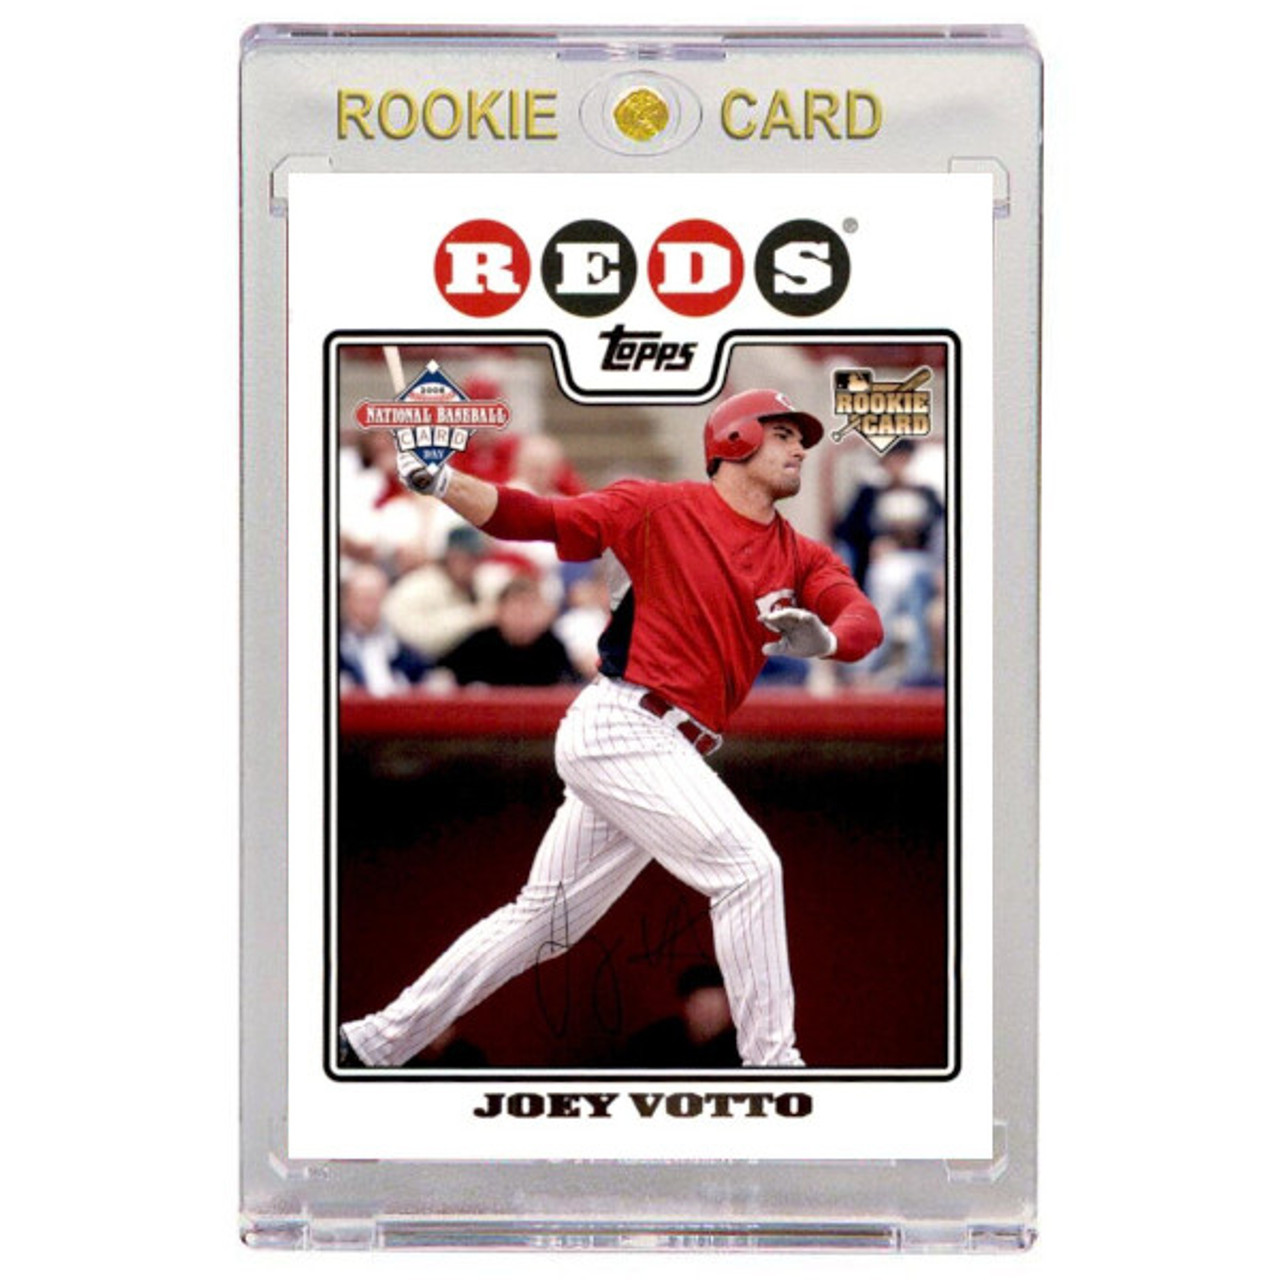 Joey Votto Cincinnati Reds 2008 Topps National Card Day # 7 Rookie Card